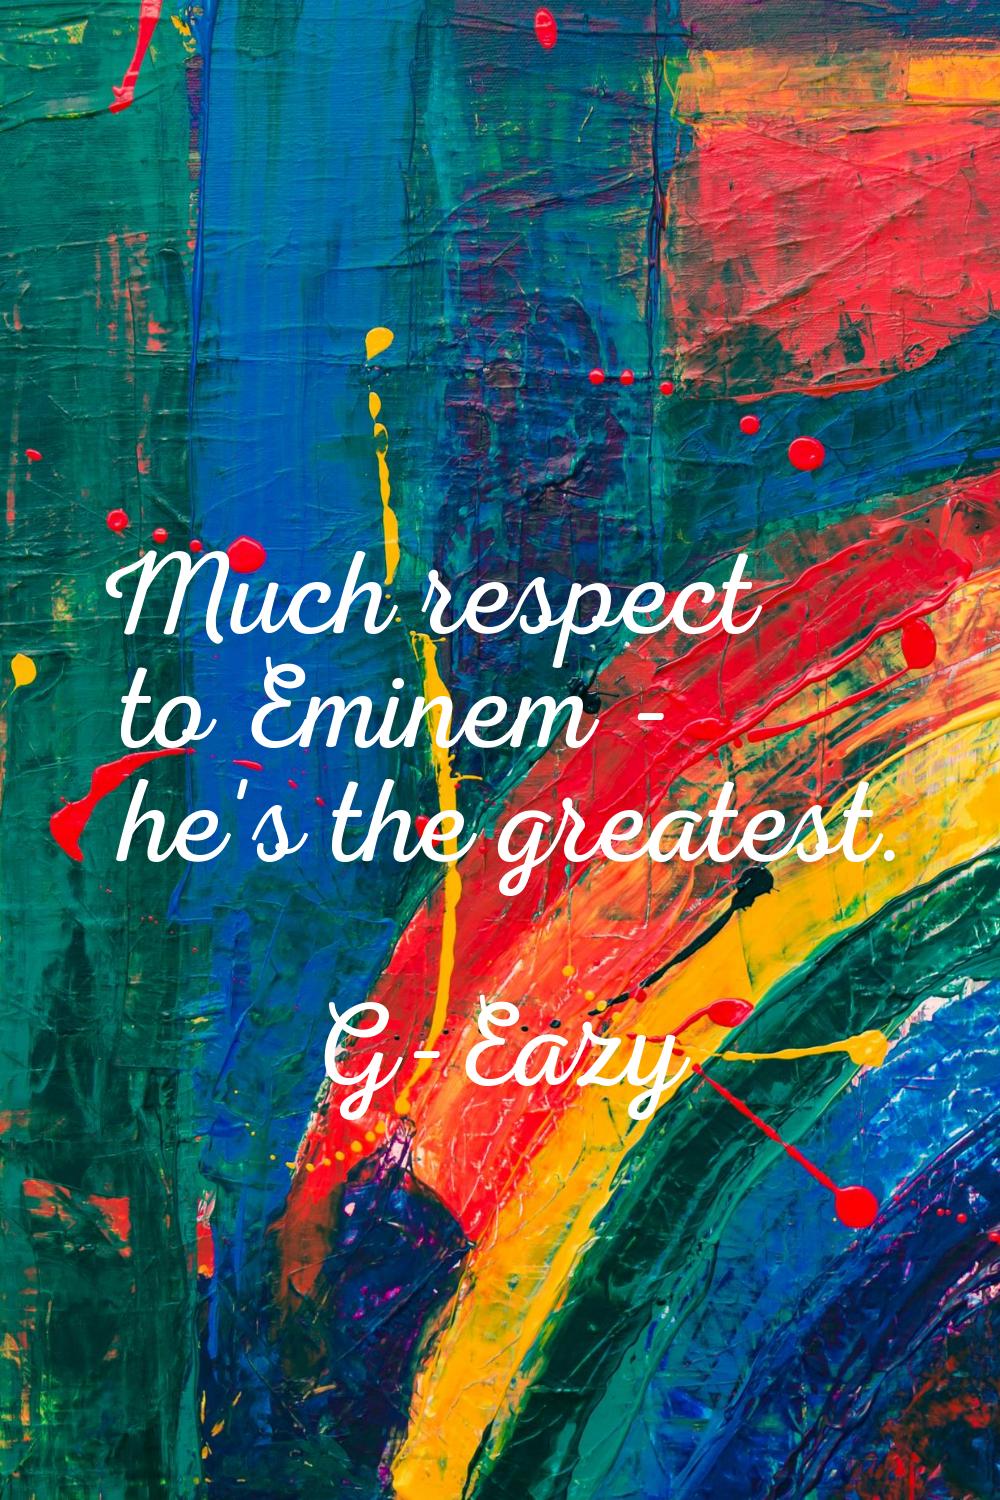 Much respect to Eminem - he's the greatest.